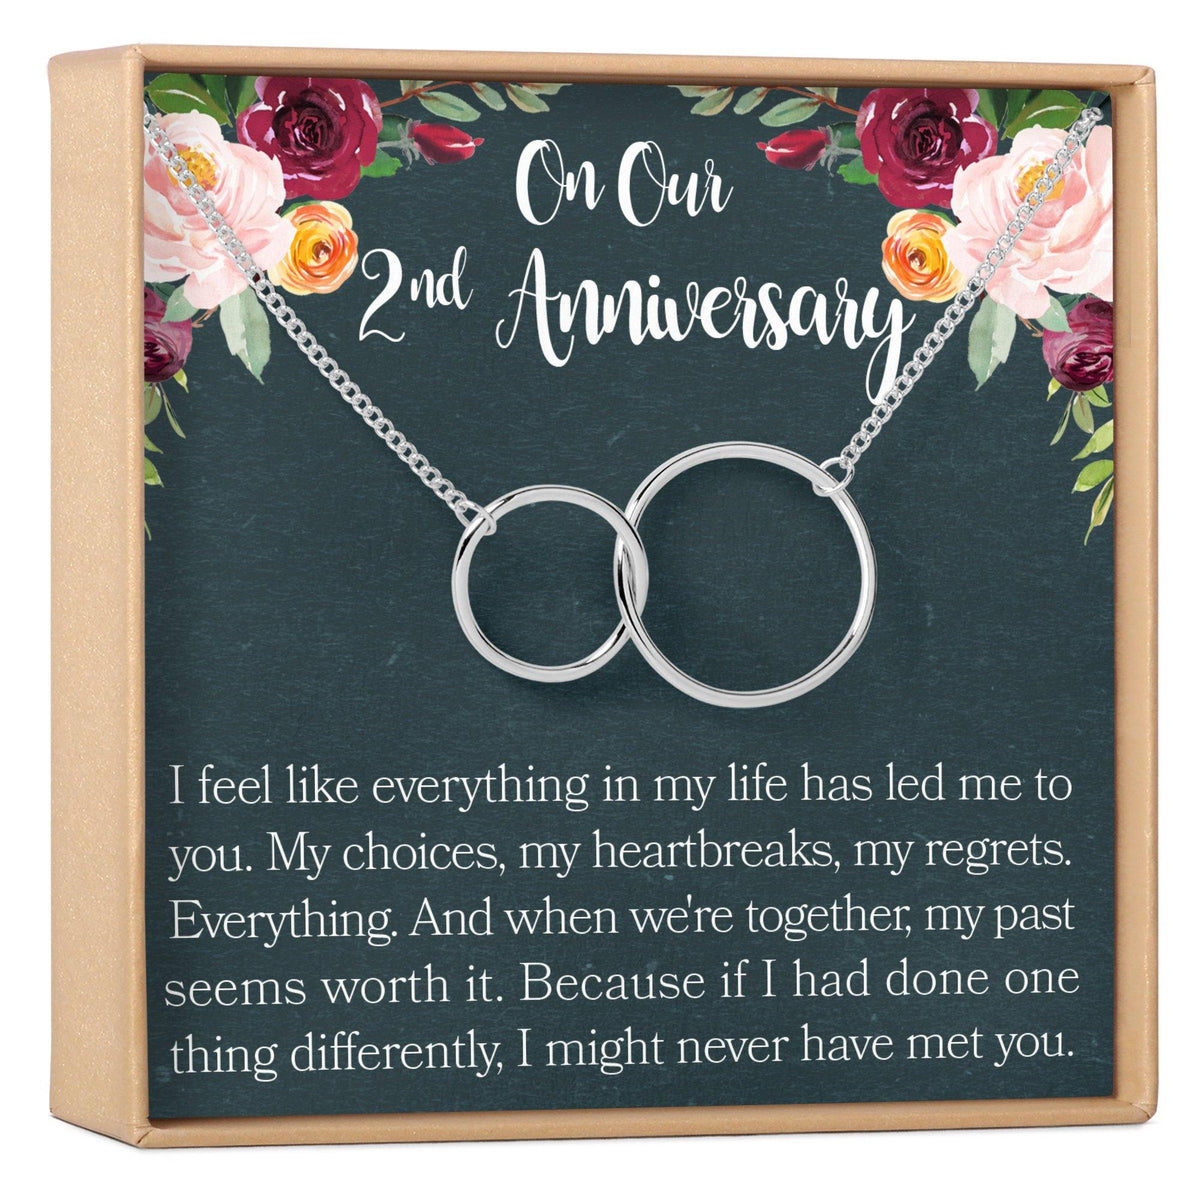 2nd Anniversary Necklace - Dear Ava, Jewelry / Necklaces / Pendants